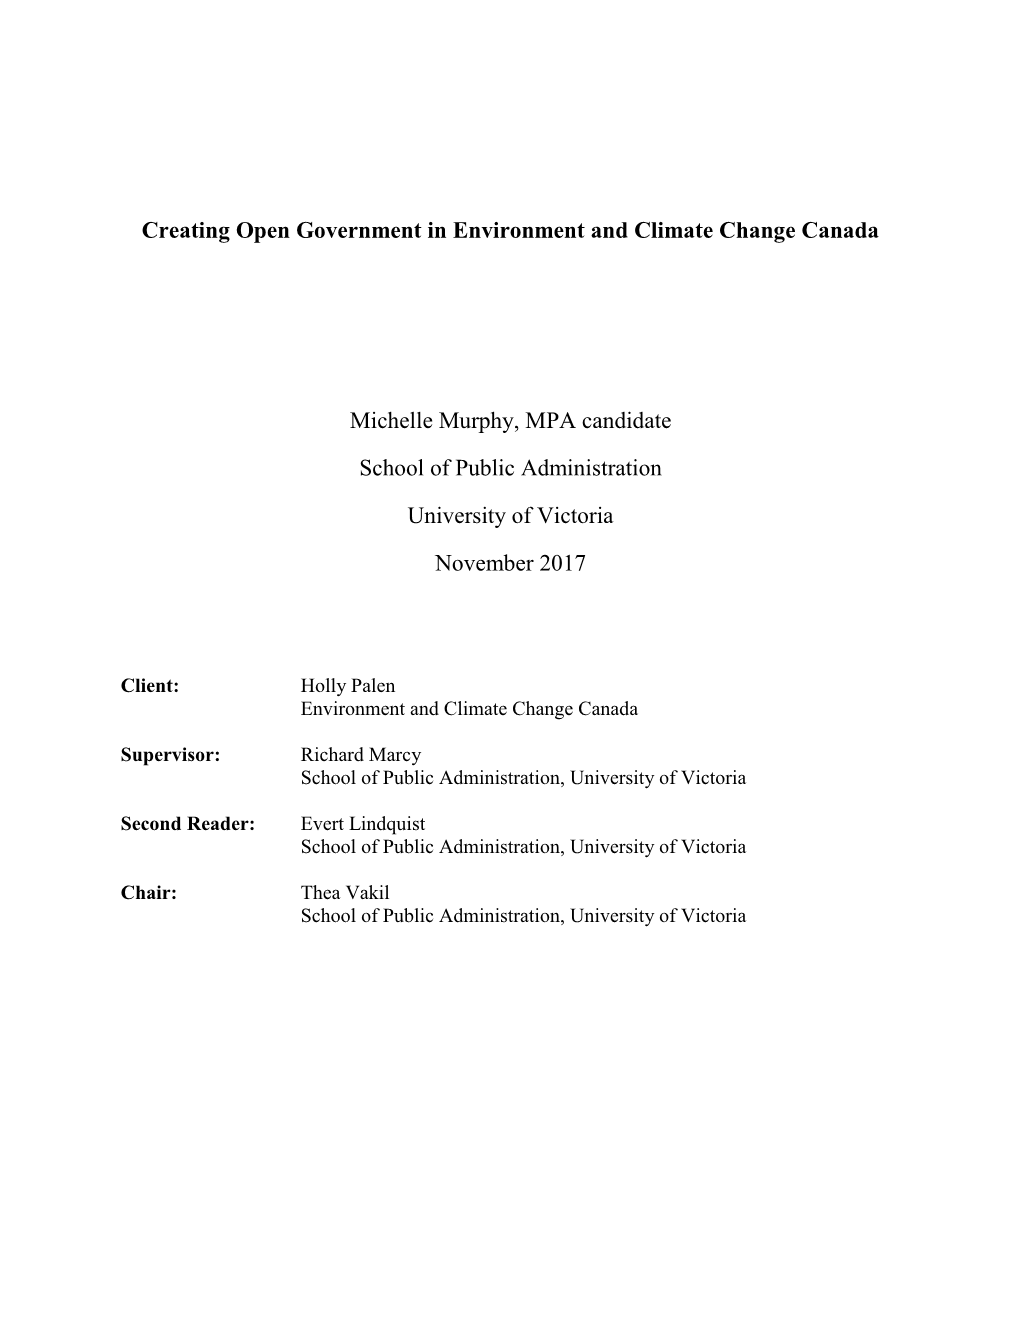 Creating Open Government in Environment and Climate Change Canada